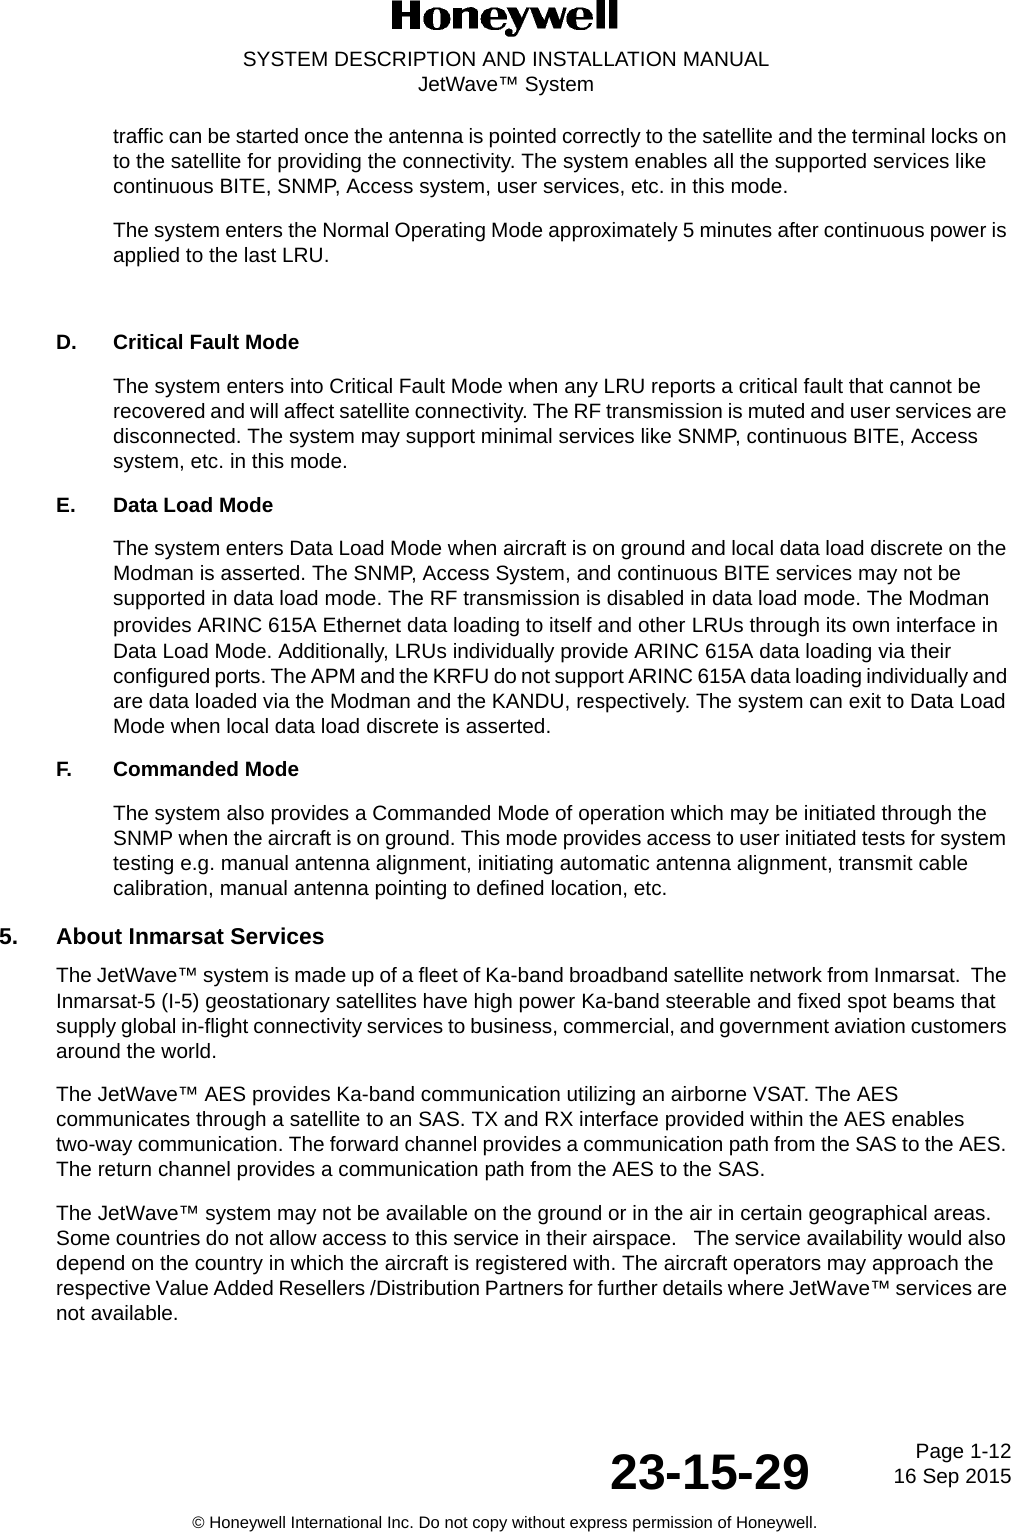 Page 1-1216 Sep 201523-15-29SYSTEM DESCRIPTION AND INSTALLATION MANUALJetWave™ System© Honeywell International Inc. Do not copy without express permission of Honeywell.traffic can be started once the antenna is pointed correctly to the satellite and the terminal locks on to the satellite for providing the connectivity. The system enables all the supported services like continuous BITE, SNMP, Access system, user services, etc. in this mode.The system enters the Normal Operating Mode approximately 5 minutes after continuous power is applied to the last LRU.D. Critical Fault ModeThe system enters into Critical Fault Mode when any LRU reports a critical fault that cannot be recovered and will affect satellite connectivity. The RF transmission is muted and user services are disconnected. The system may support minimal services like SNMP, continuous BITE, Access system, etc. in this mode.E. Data Load ModeThe system enters Data Load Mode when aircraft is on ground and local data load discrete on the Modman is asserted. The SNMP, Access System, and continuous BITE services may not be supported in data load mode. The RF transmission is disabled in data load mode. The Modman provides ARINC 615A Ethernet data loading to itself and other LRUs through its own interface in Data Load Mode. Additionally, LRUs individually provide ARINC 615A data loading via their configured ports. The APM and the KRFU do not support ARINC 615A data loading individually and are data loaded via the Modman and the KANDU, respectively. The system can exit to Data Load Mode when local data load discrete is asserted.F. Commanded ModeThe system also provides a Commanded Mode of operation which may be initiated through the SNMP when the aircraft is on ground. This mode provides access to user initiated tests for system testing e.g. manual antenna alignment, initiating automatic antenna alignment, transmit cable calibration, manual antenna pointing to defined location, etc.5. About Inmarsat ServicesThe JetWave™ system is made up of a fleet of Ka-band broadband satellite network from Inmarsat.  The Inmarsat-5 (I-5) geostationary satellites have high power Ka-band steerable and fixed spot beams that supply global in-flight connectivity services to business, commercial, and government aviation customers around the world.The JetWave™ AES provides Ka-band communication utilizing an airborne VSAT. The AES communicates through a satellite to an SAS. TX and RX interface provided within the AES enables two-way communication. The forward channel provides a communication path from the SAS to the AES. The return channel provides a communication path from the AES to the SAS.The JetWave™ system may not be available on the ground or in the air in certain geographical areas. Some countries do not allow access to this service in their airspace.   The service availability would also depend on the country in which the aircraft is registered with. The aircraft operators may approach the respective Value Added Resellers /Distribution Partners for further details where JetWave™ services are not available.